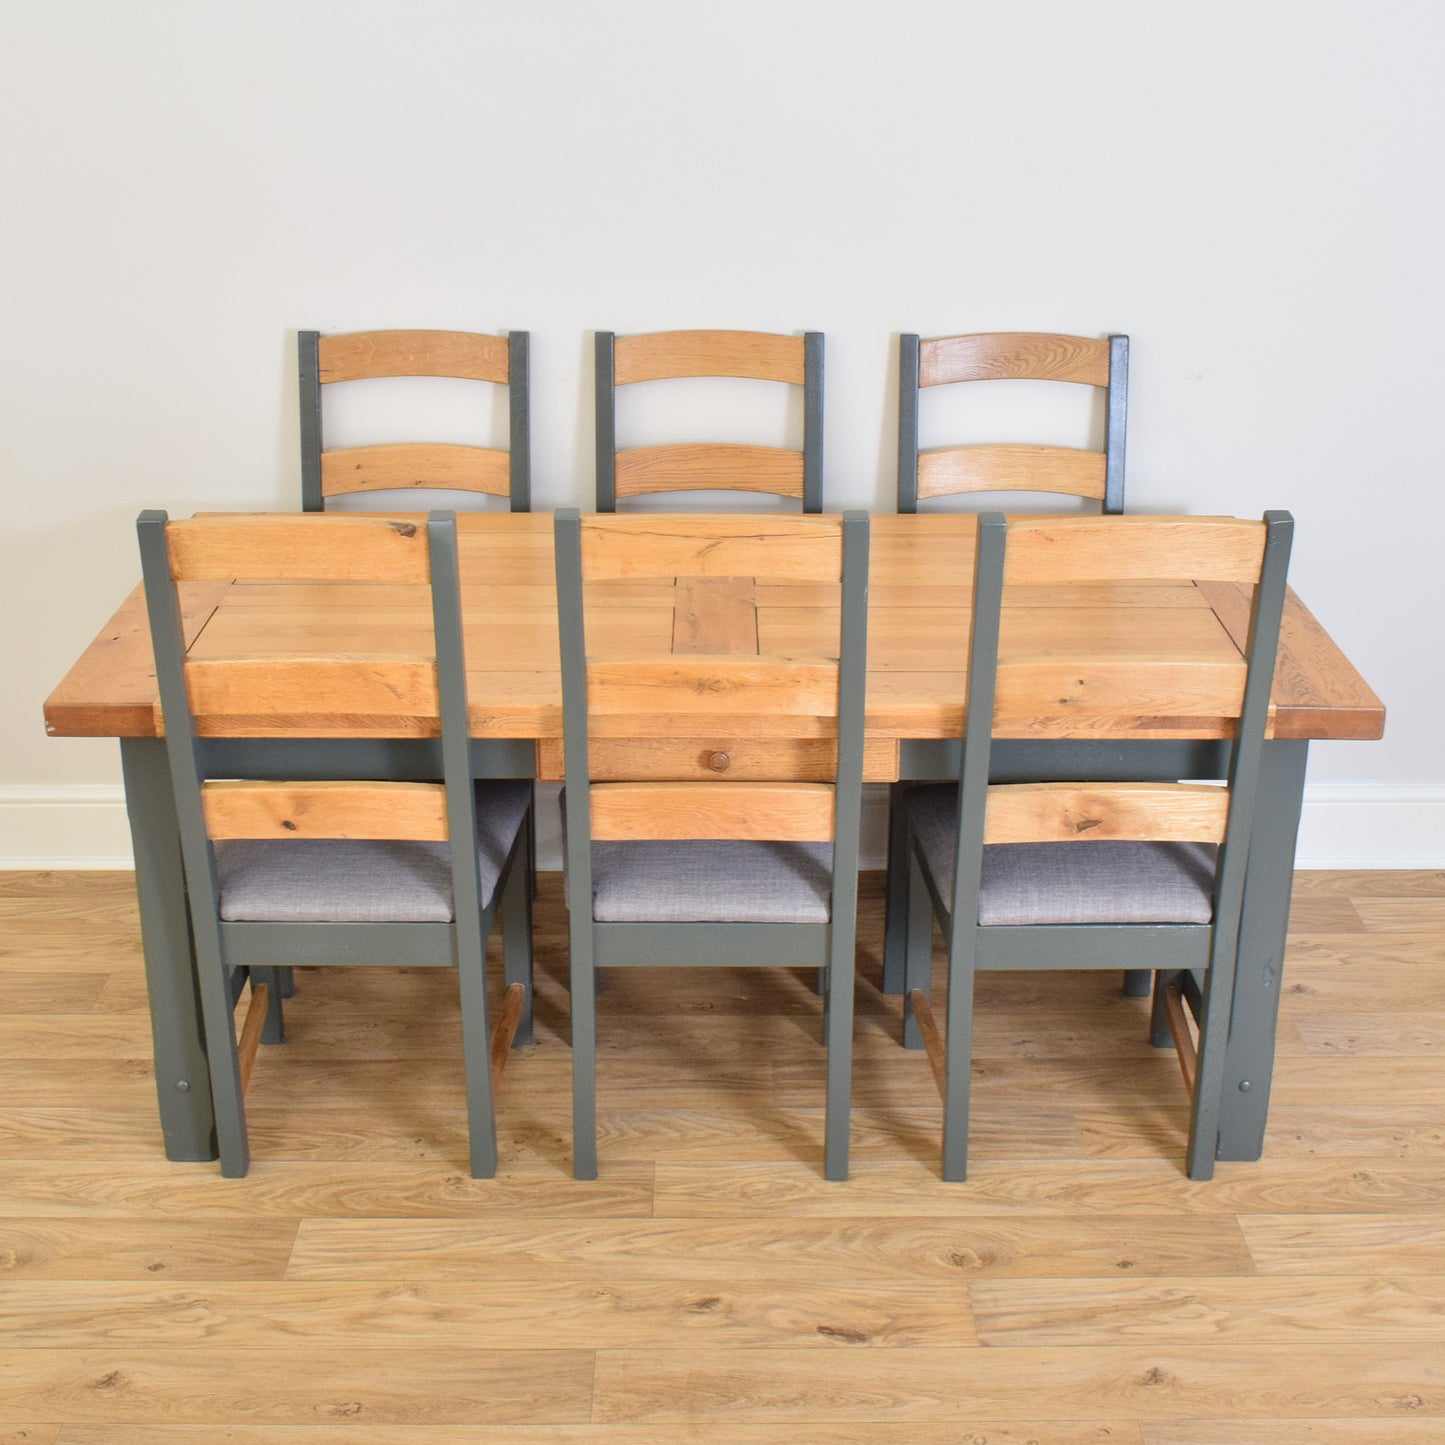 Painted Table and Six Chairs